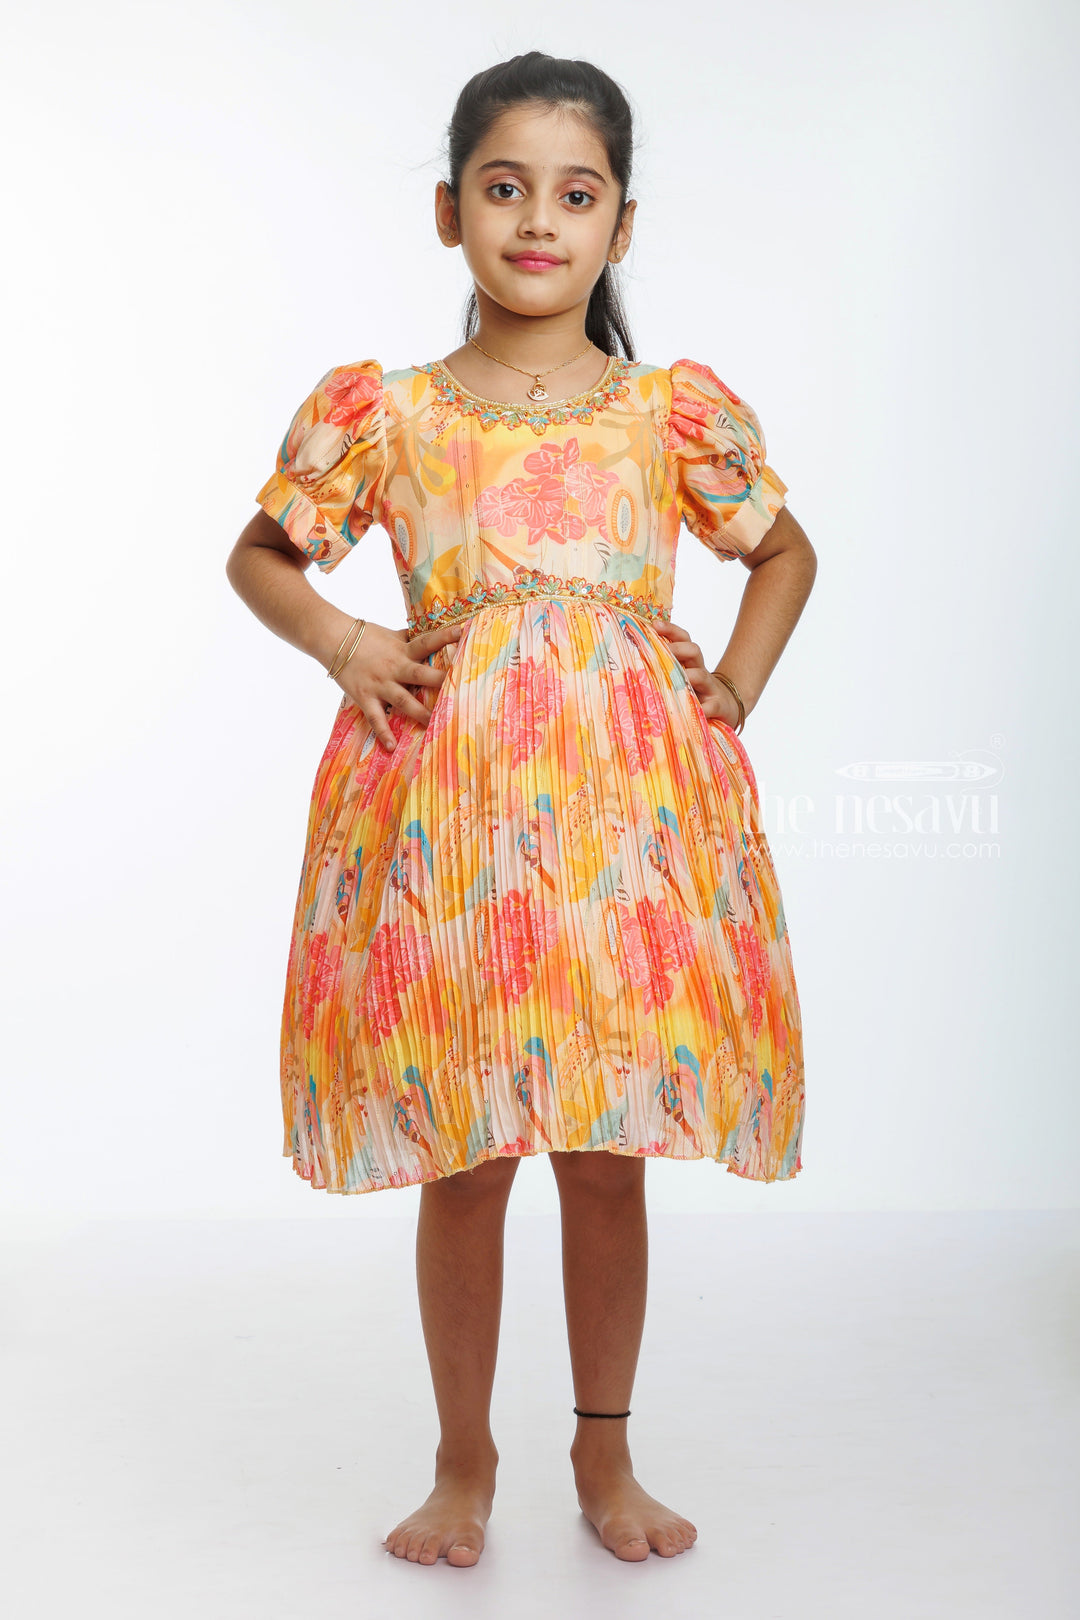 The Nesavu Silk Party Frock Sunset Hues Pleated Party Frock with Embellished Neckline for Girls Nesavu 16 (1Y) / Orange / Chinnon SF756A-16 Shop Vibrant Pleated Girls' Party Frock | Twirl-Ready & Sparkling | The Nesavu